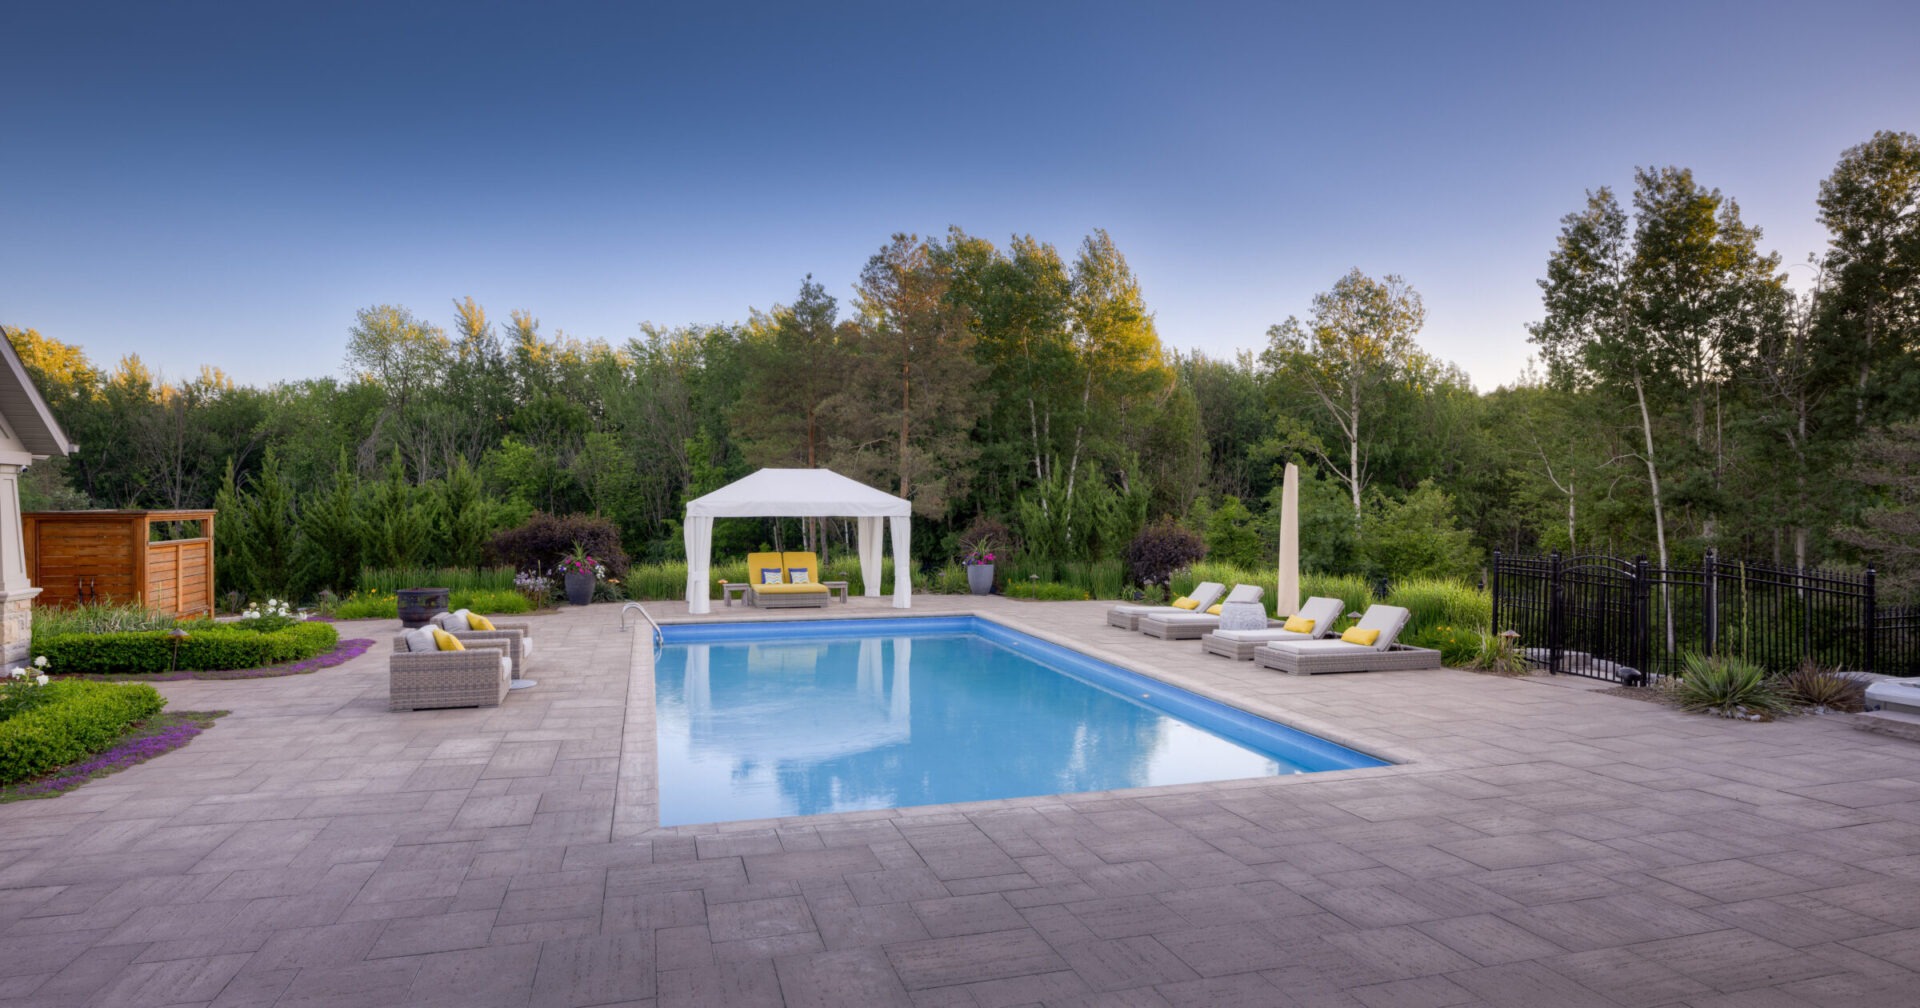 A serene backyard with a rectangular swimming pool, patio furniture, a white gazebo, surrounded by a lush forest and a clear sky above.